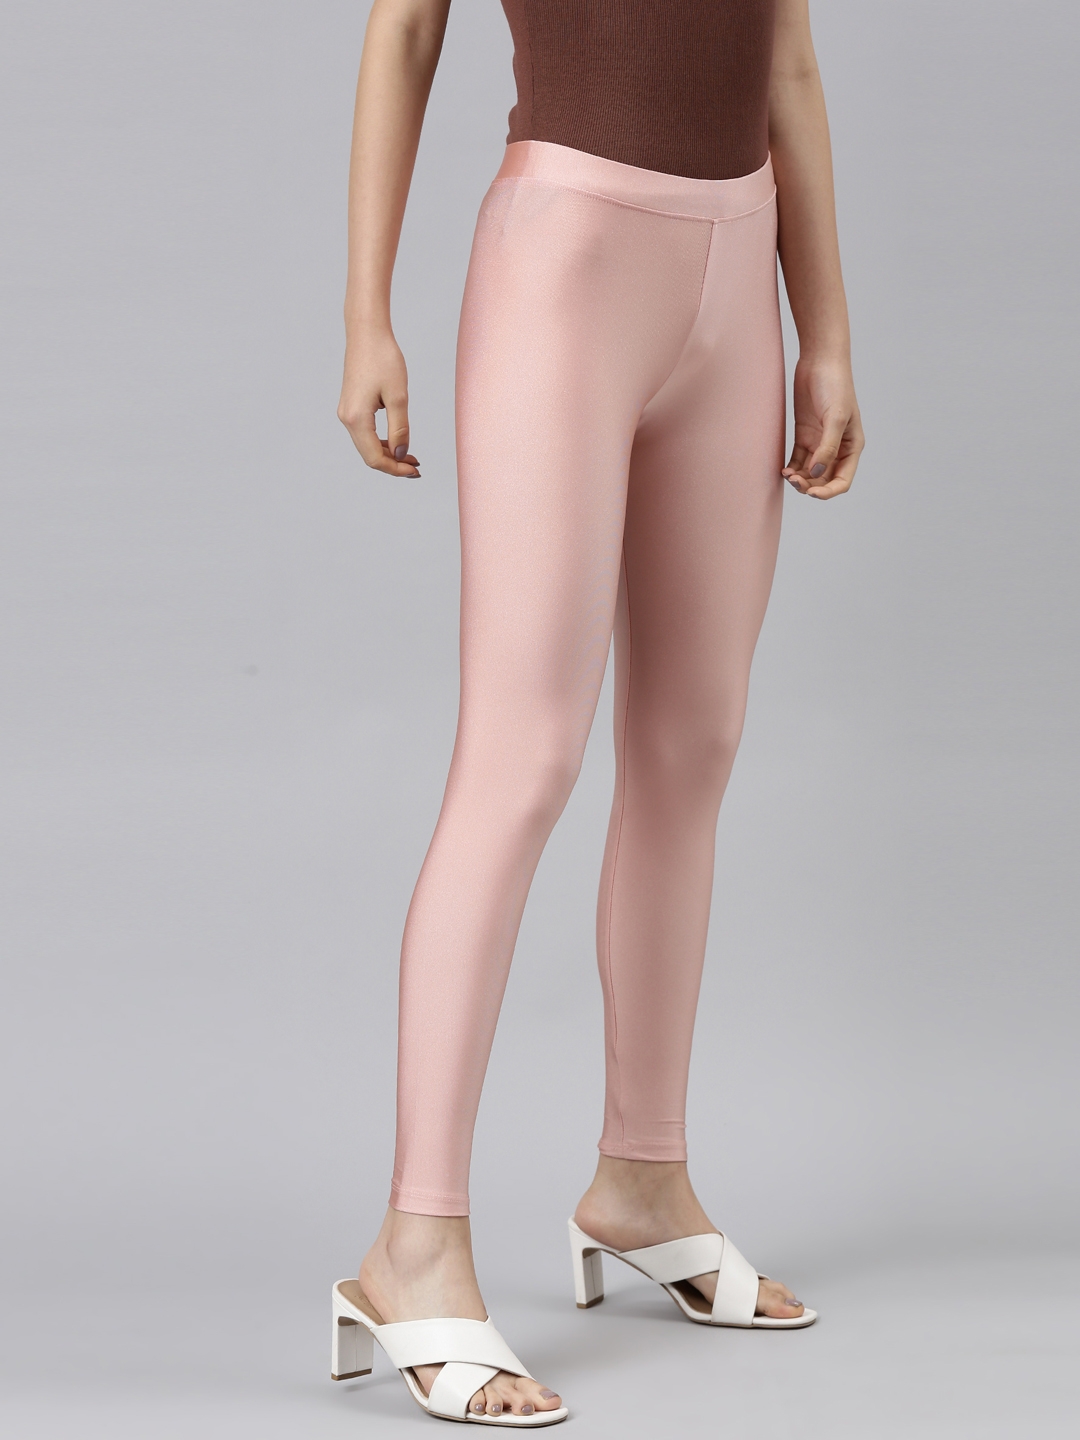 FLEXMEE 946164 High-Rise Shimmer Pink Sports Leggings – Post-Op and Wellness